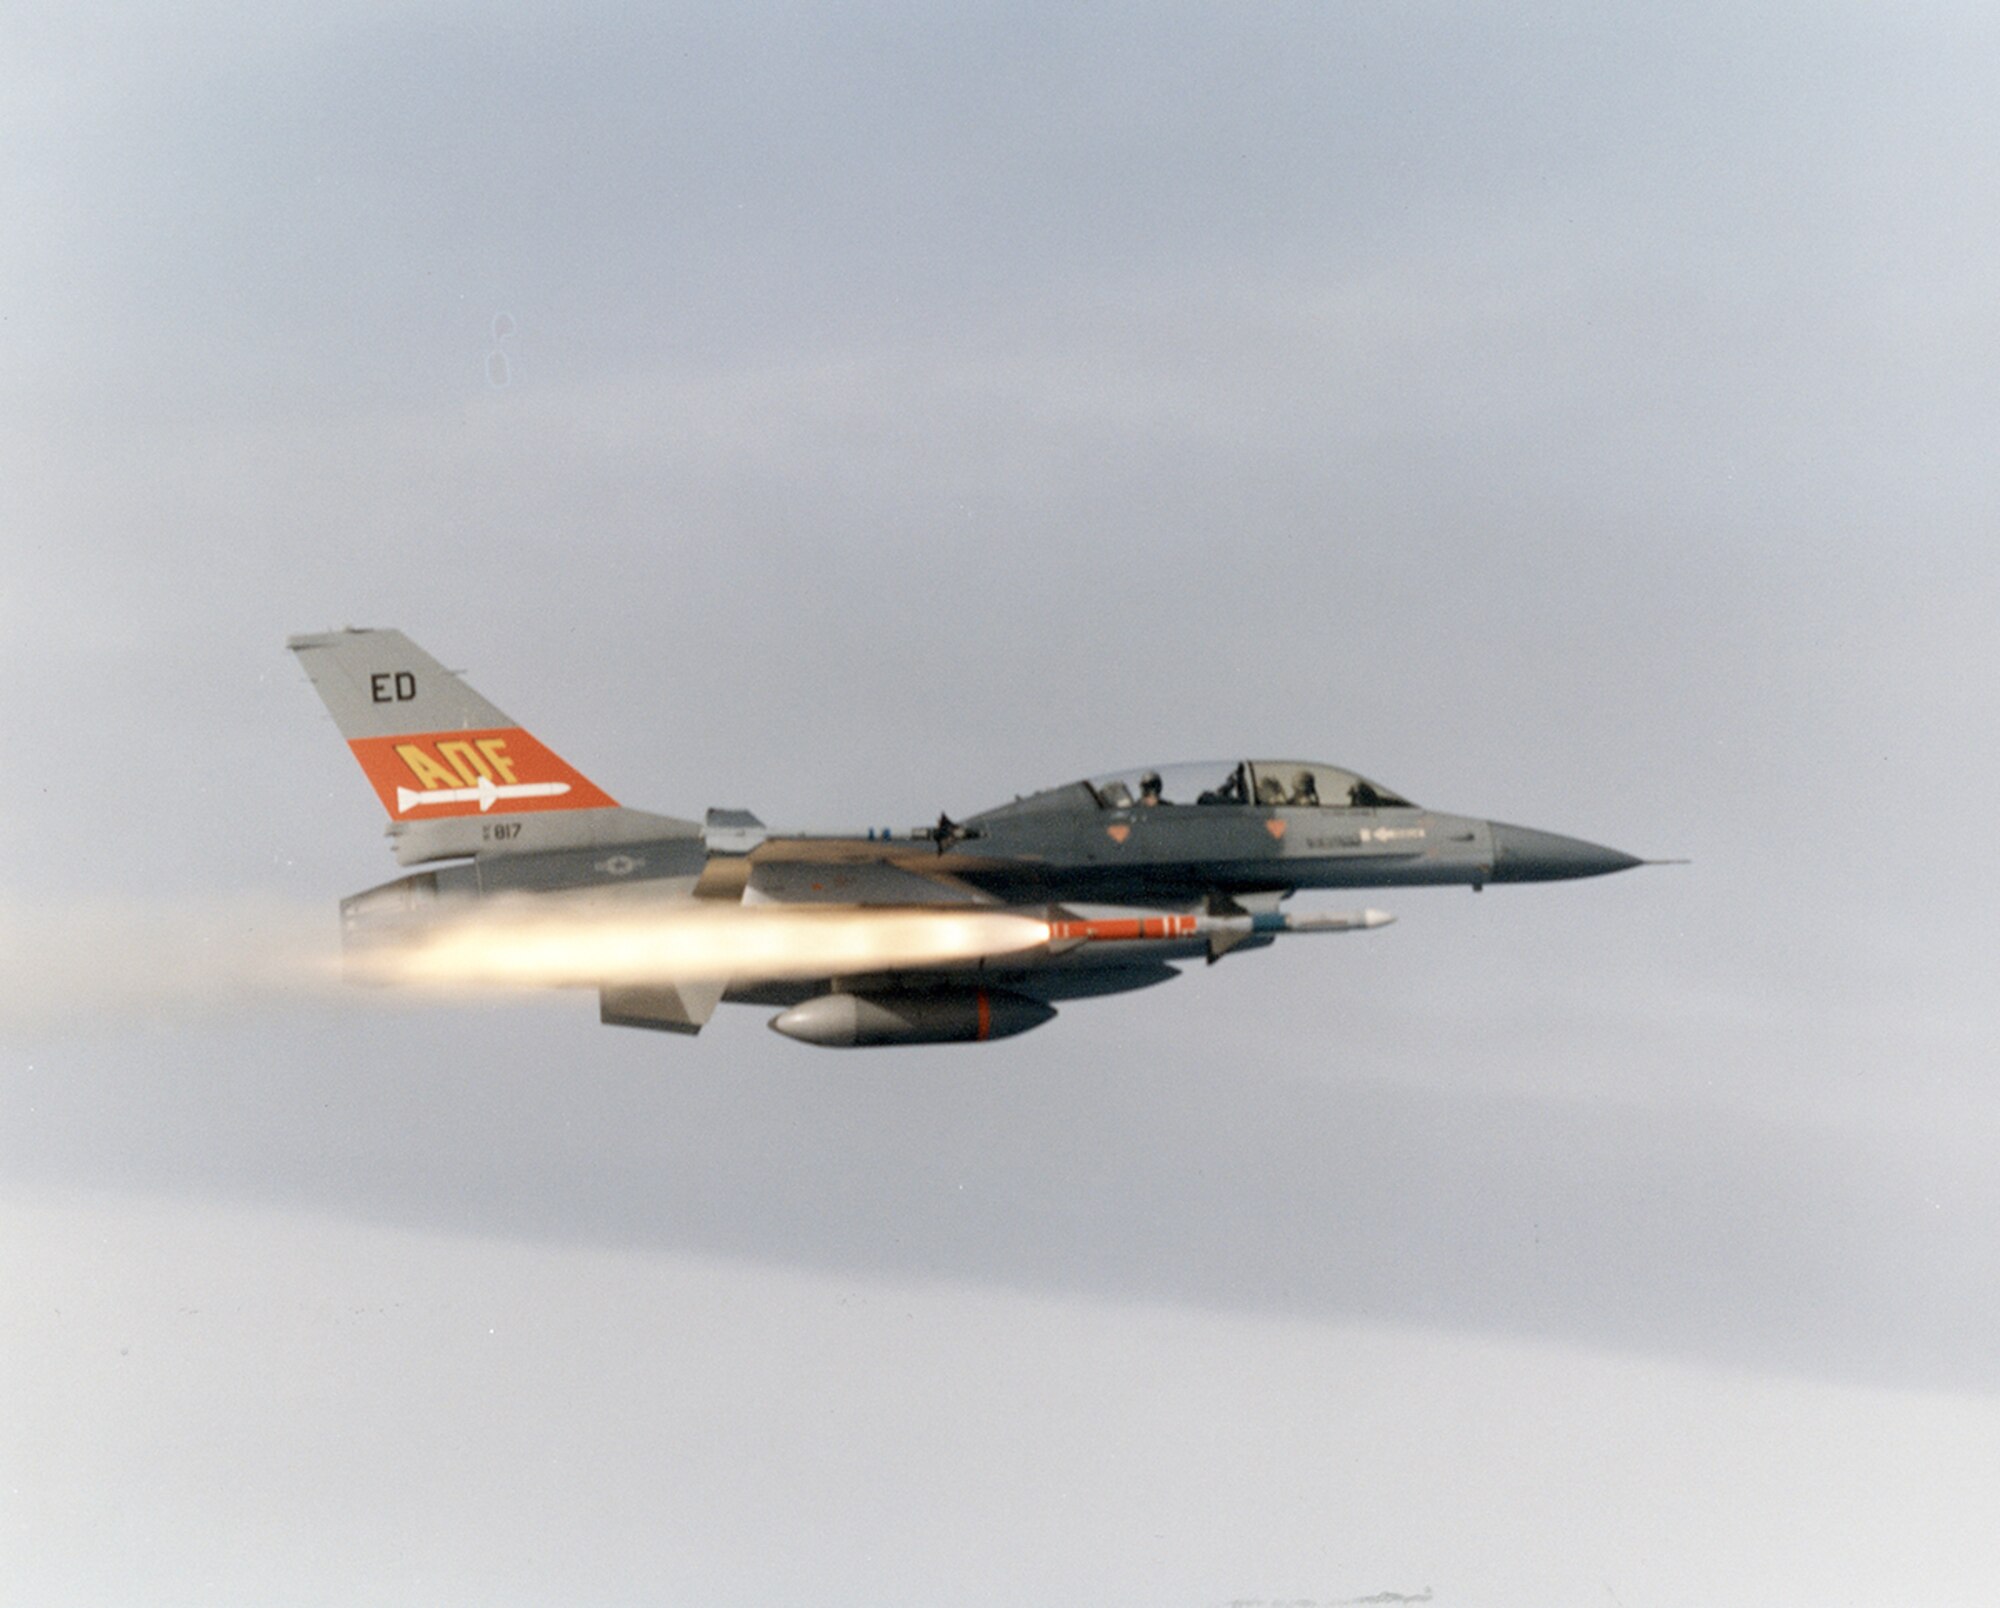 #OTD 23 Feb 1989 at Edwards - A two-seat F-16B Air Defense Fighter test aircraft successfully launched an AIM-7 Sparrow missile that destroyed a target drone off the California coast.